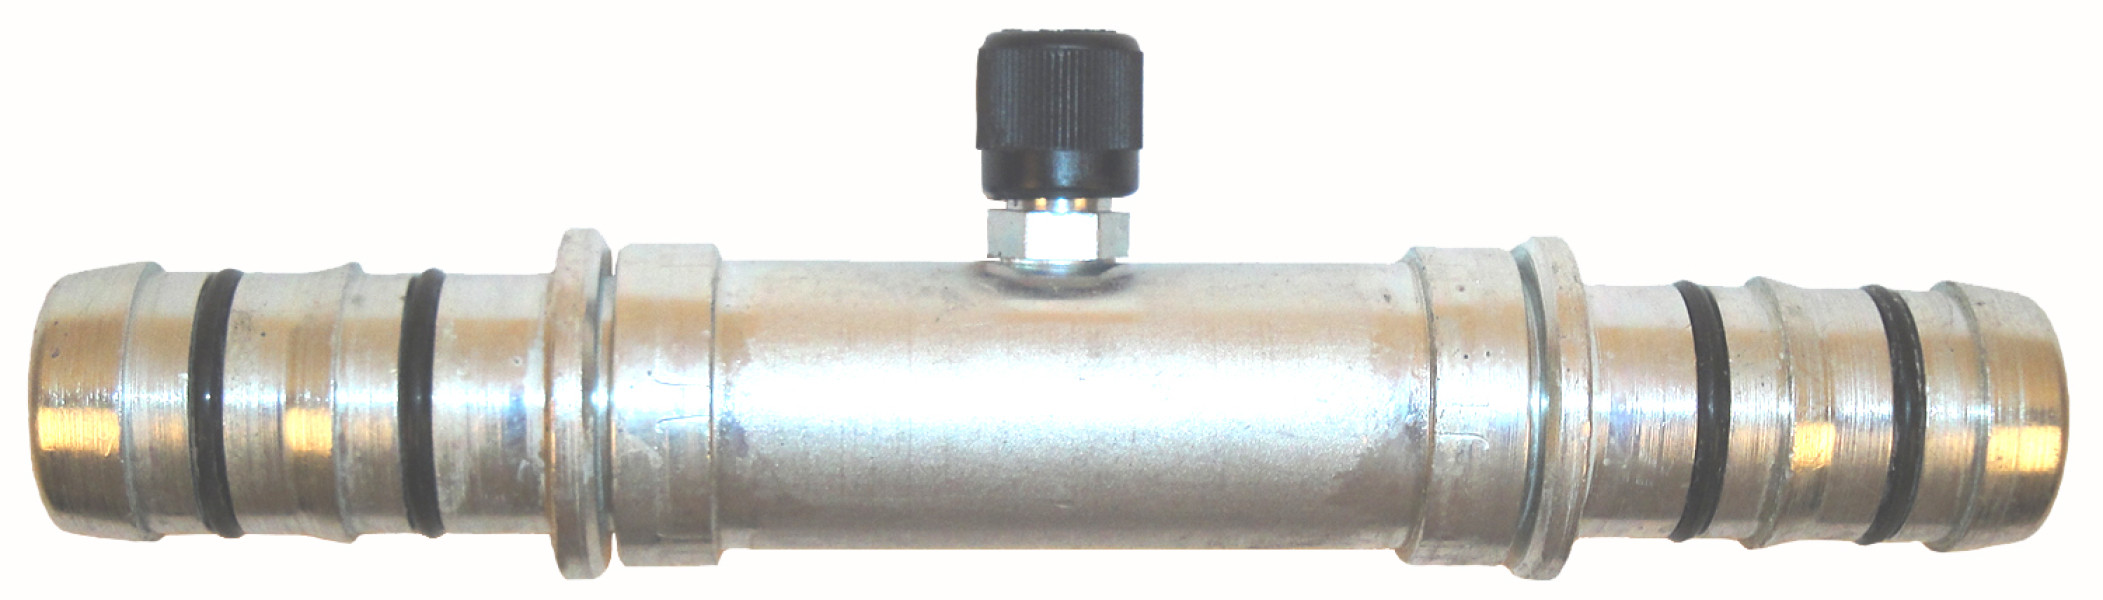 Image of A/C Refrigerant Hose Fitting from Sunair. Part number: FJ3171-1616S